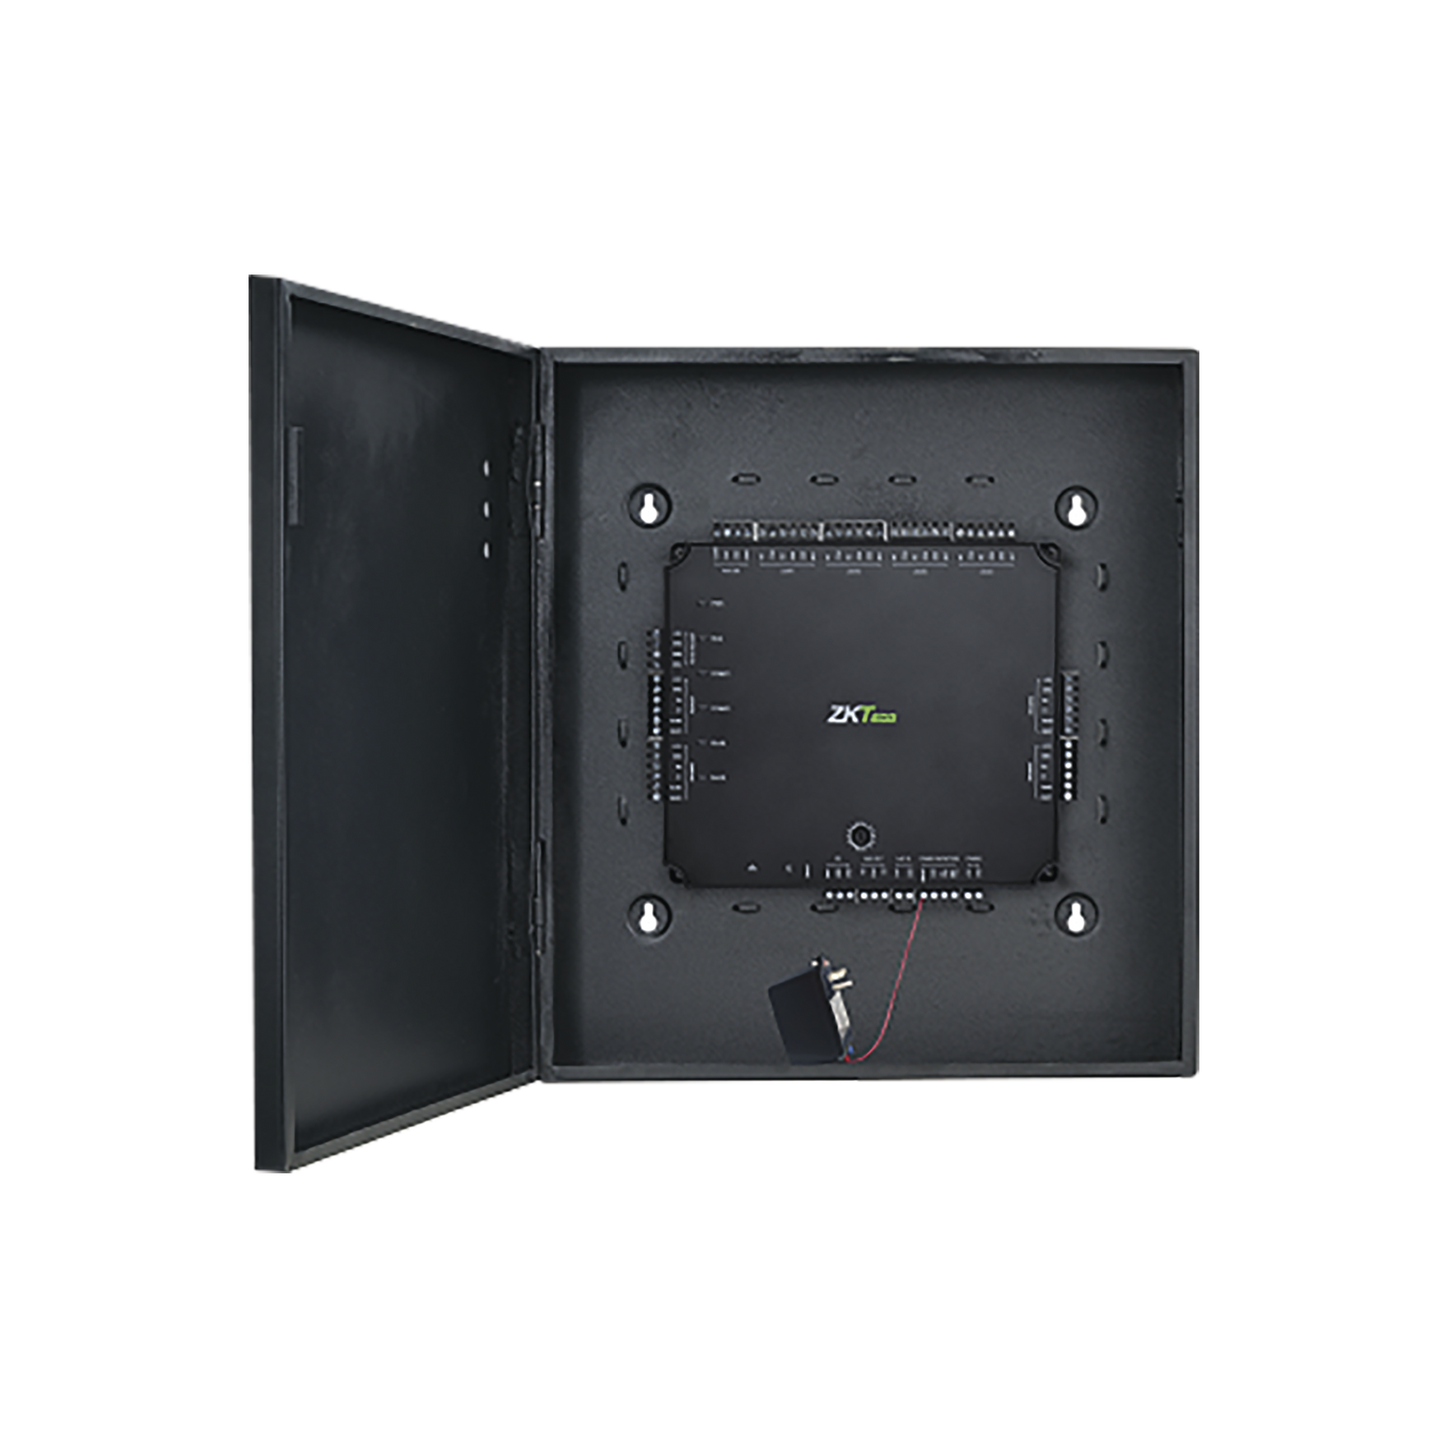 4 Doors Access Controller with Built in PoE and Wi-Fi Metal Cabinet and Power Supply Included